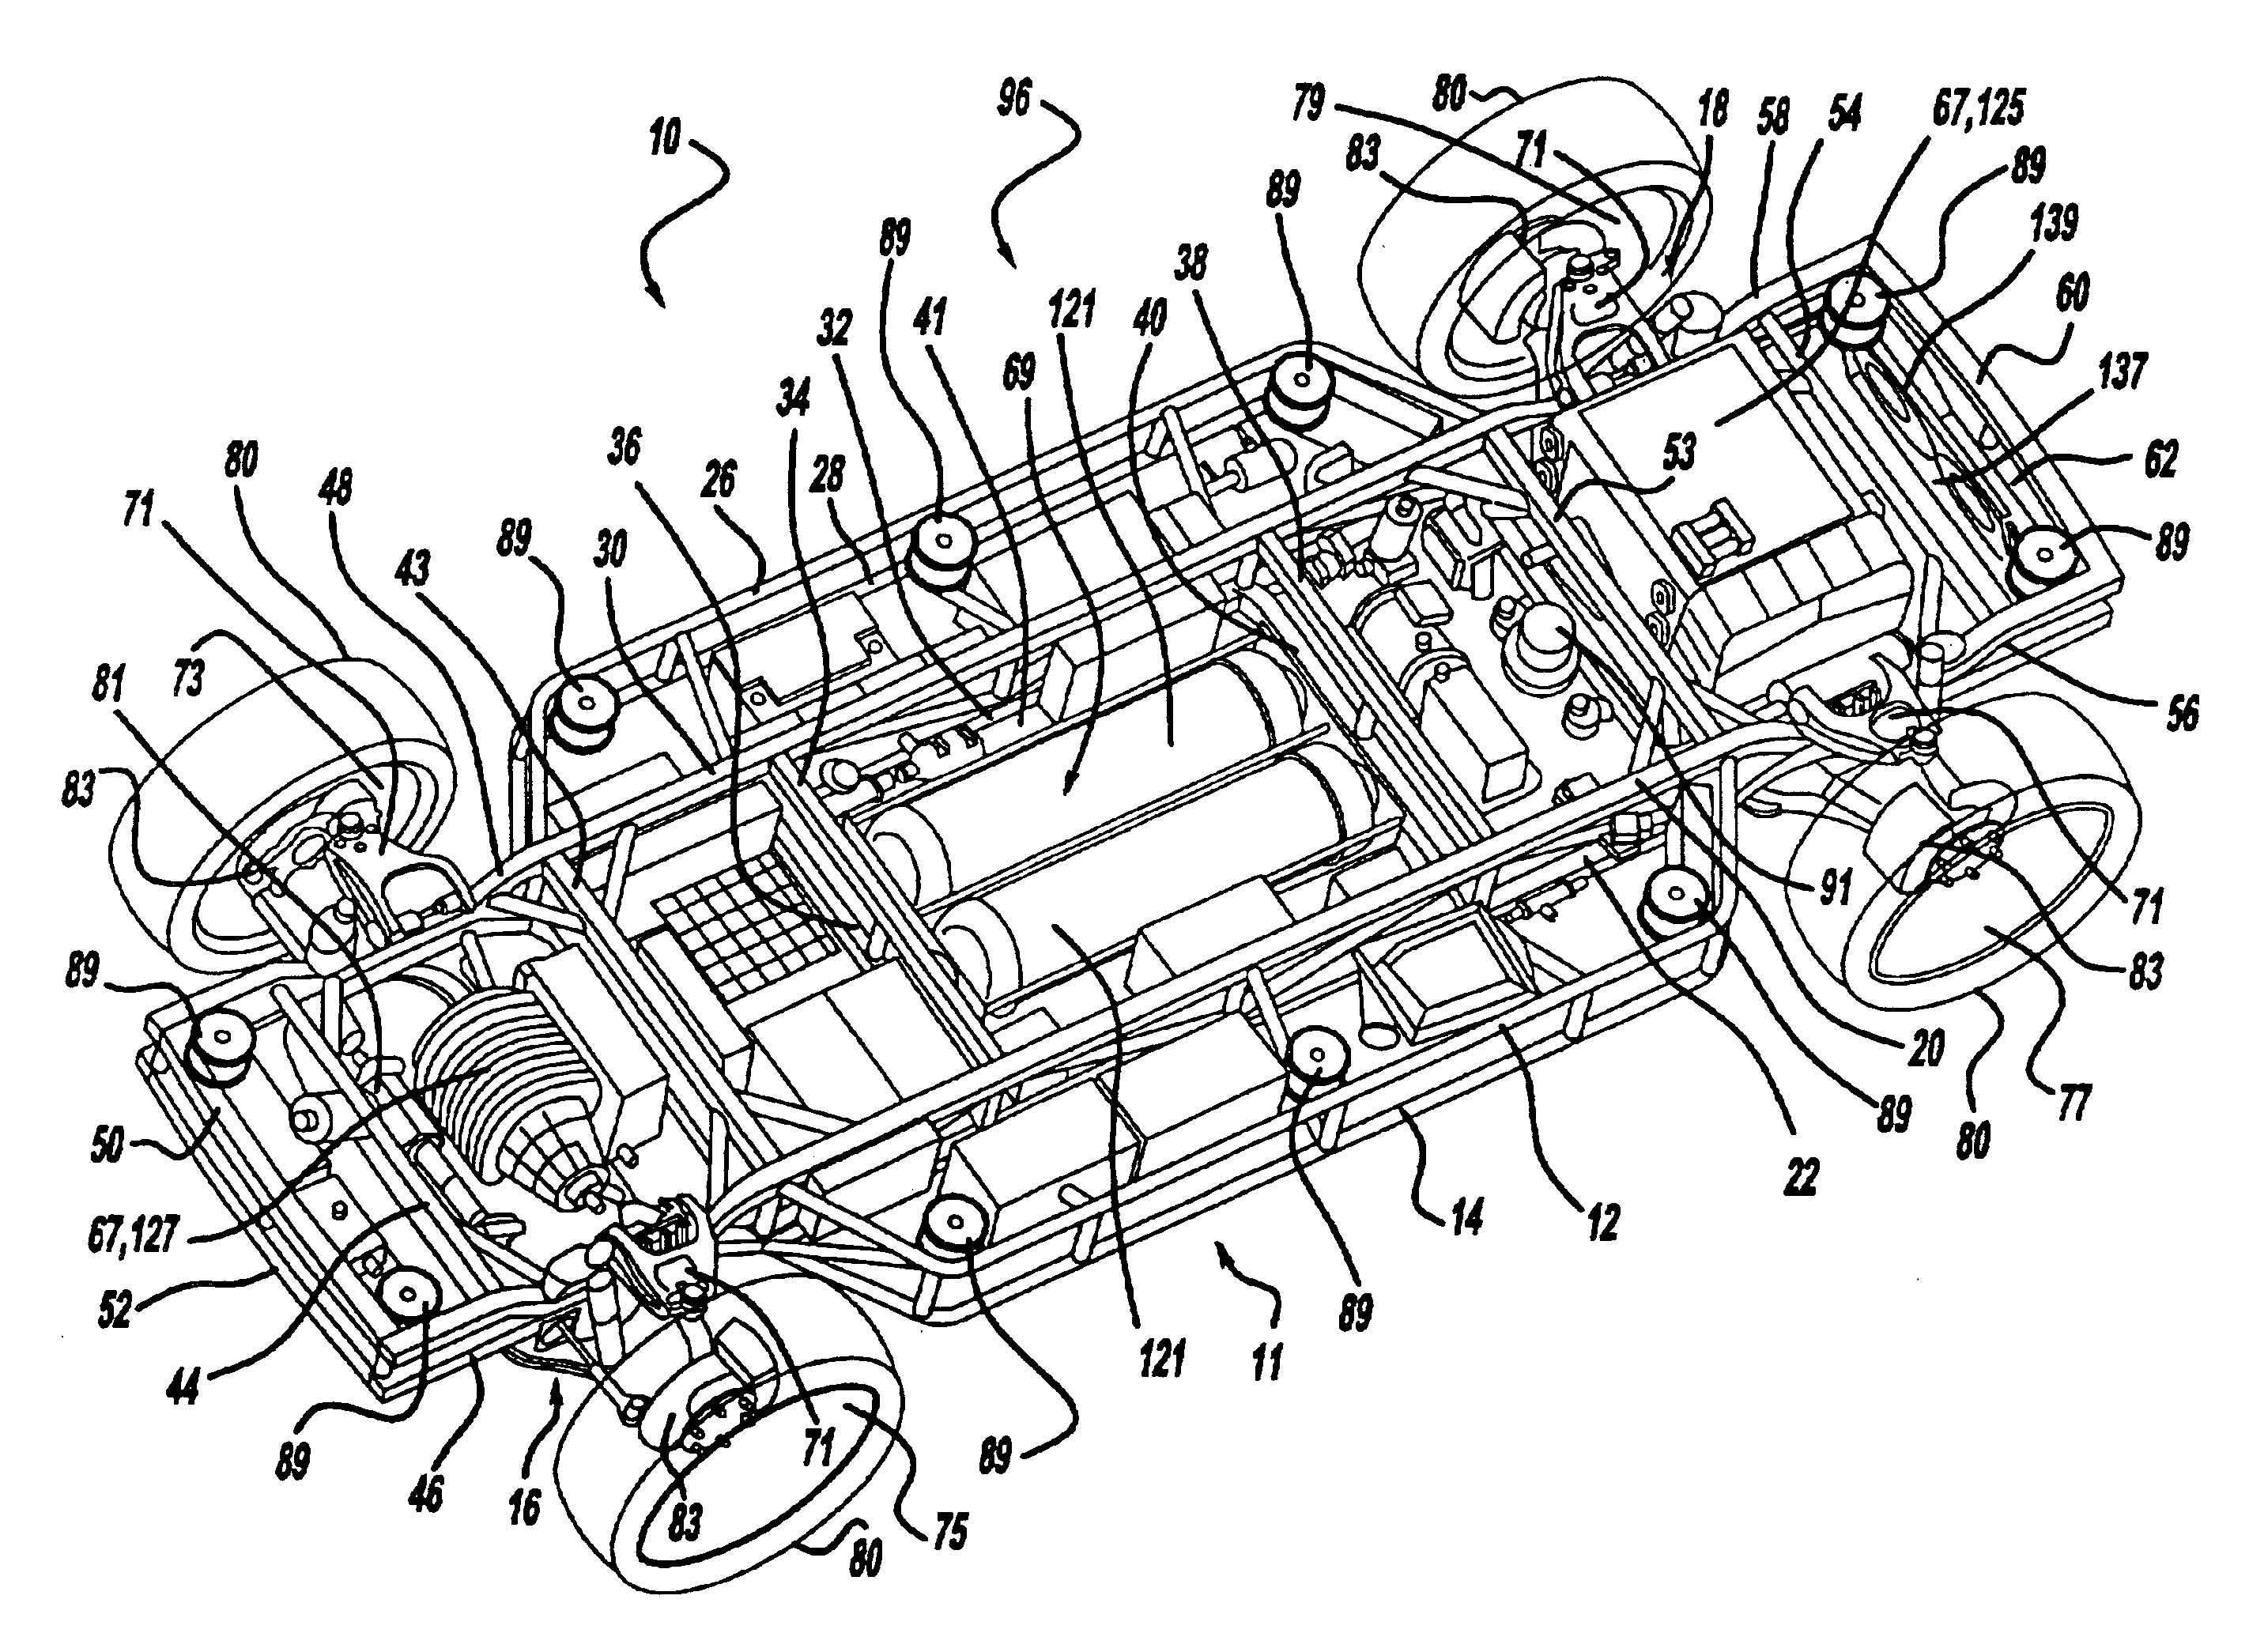 Lower vehicle body structure and method of use therefor